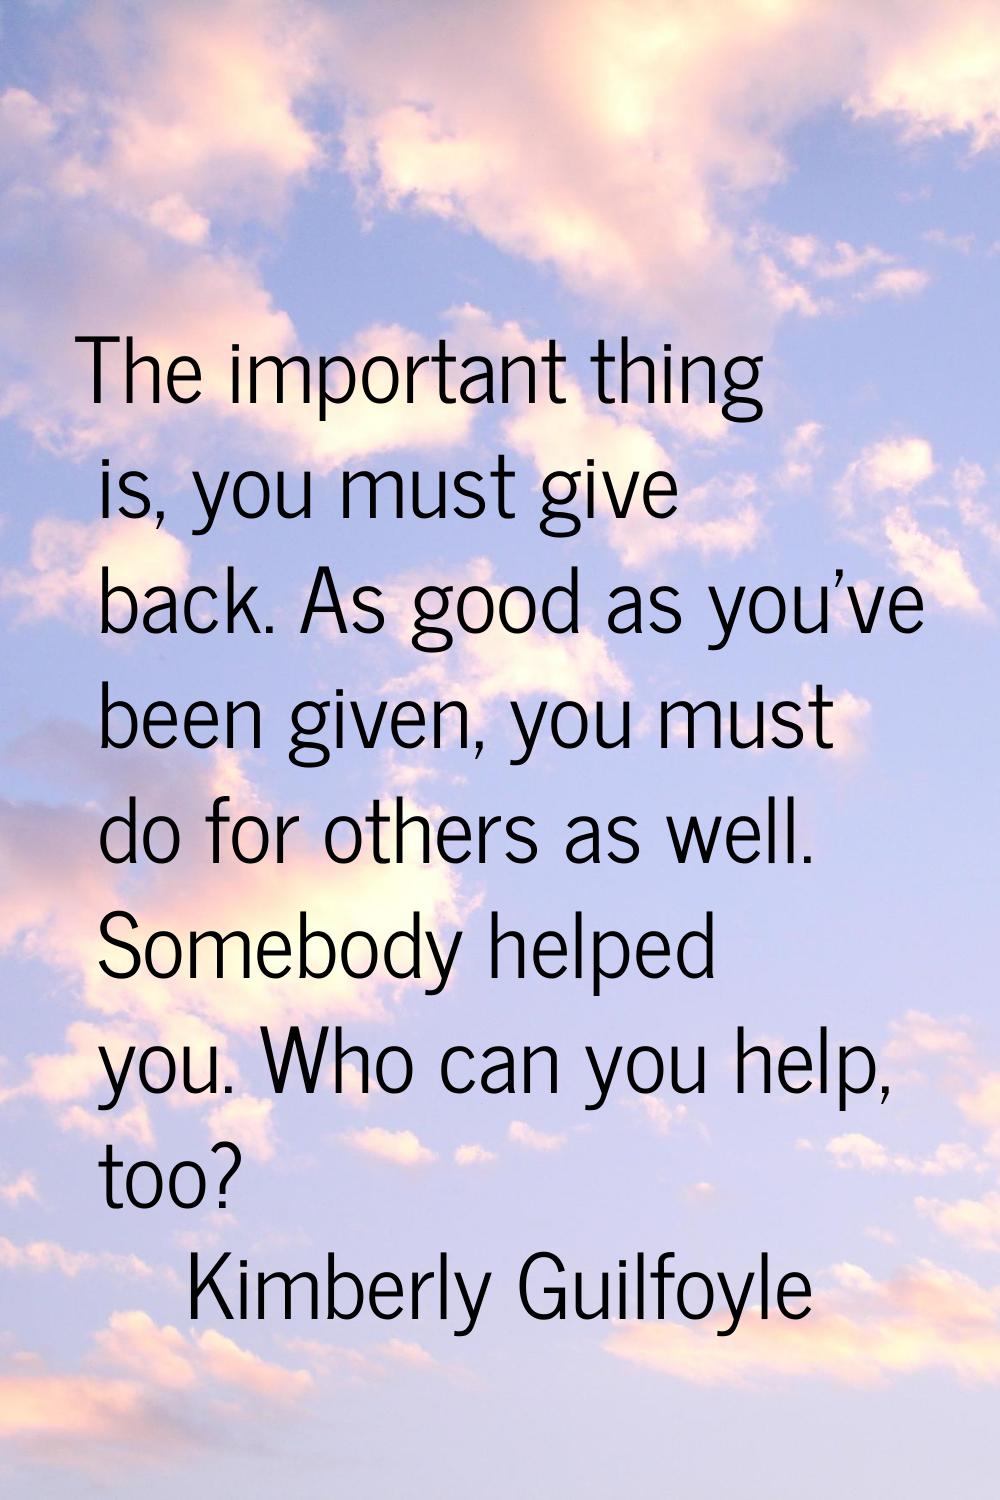 The important thing is, you must give back. As good as you've been given, you must do for others as